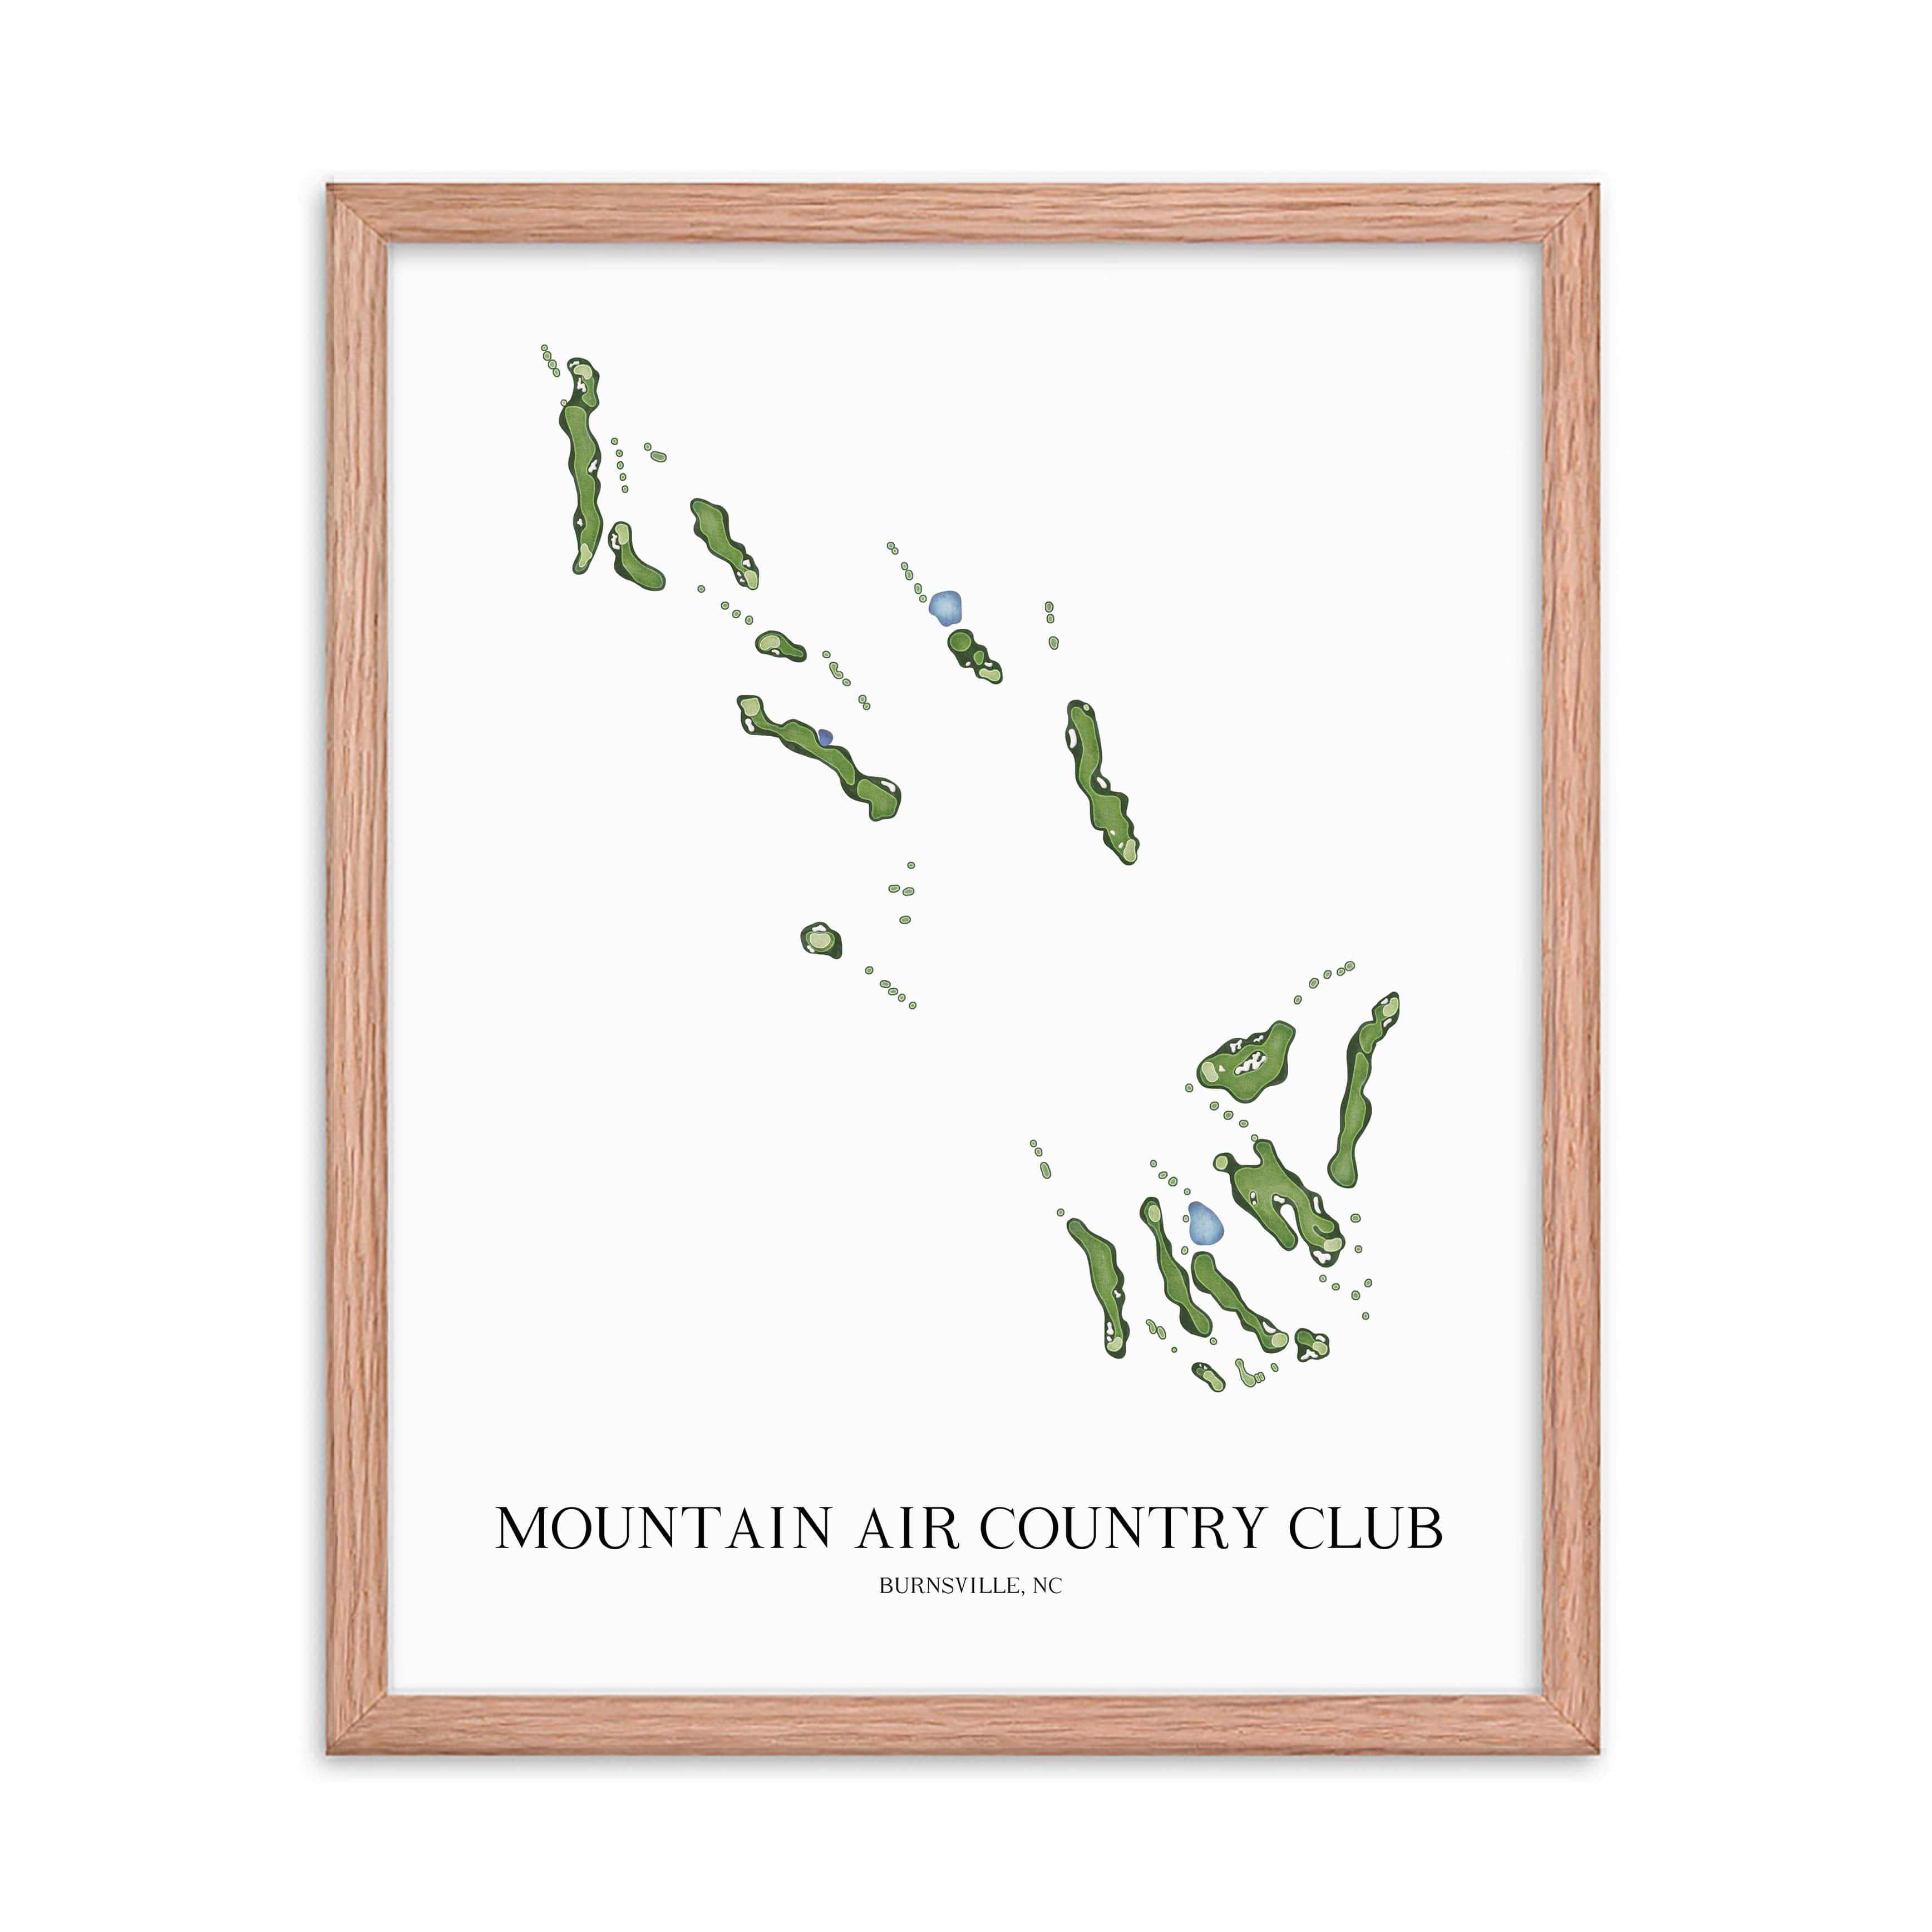 The 19th Hole Golf Shop - Golf Course Prints -  Mountain Air Country Club Golf Course Map